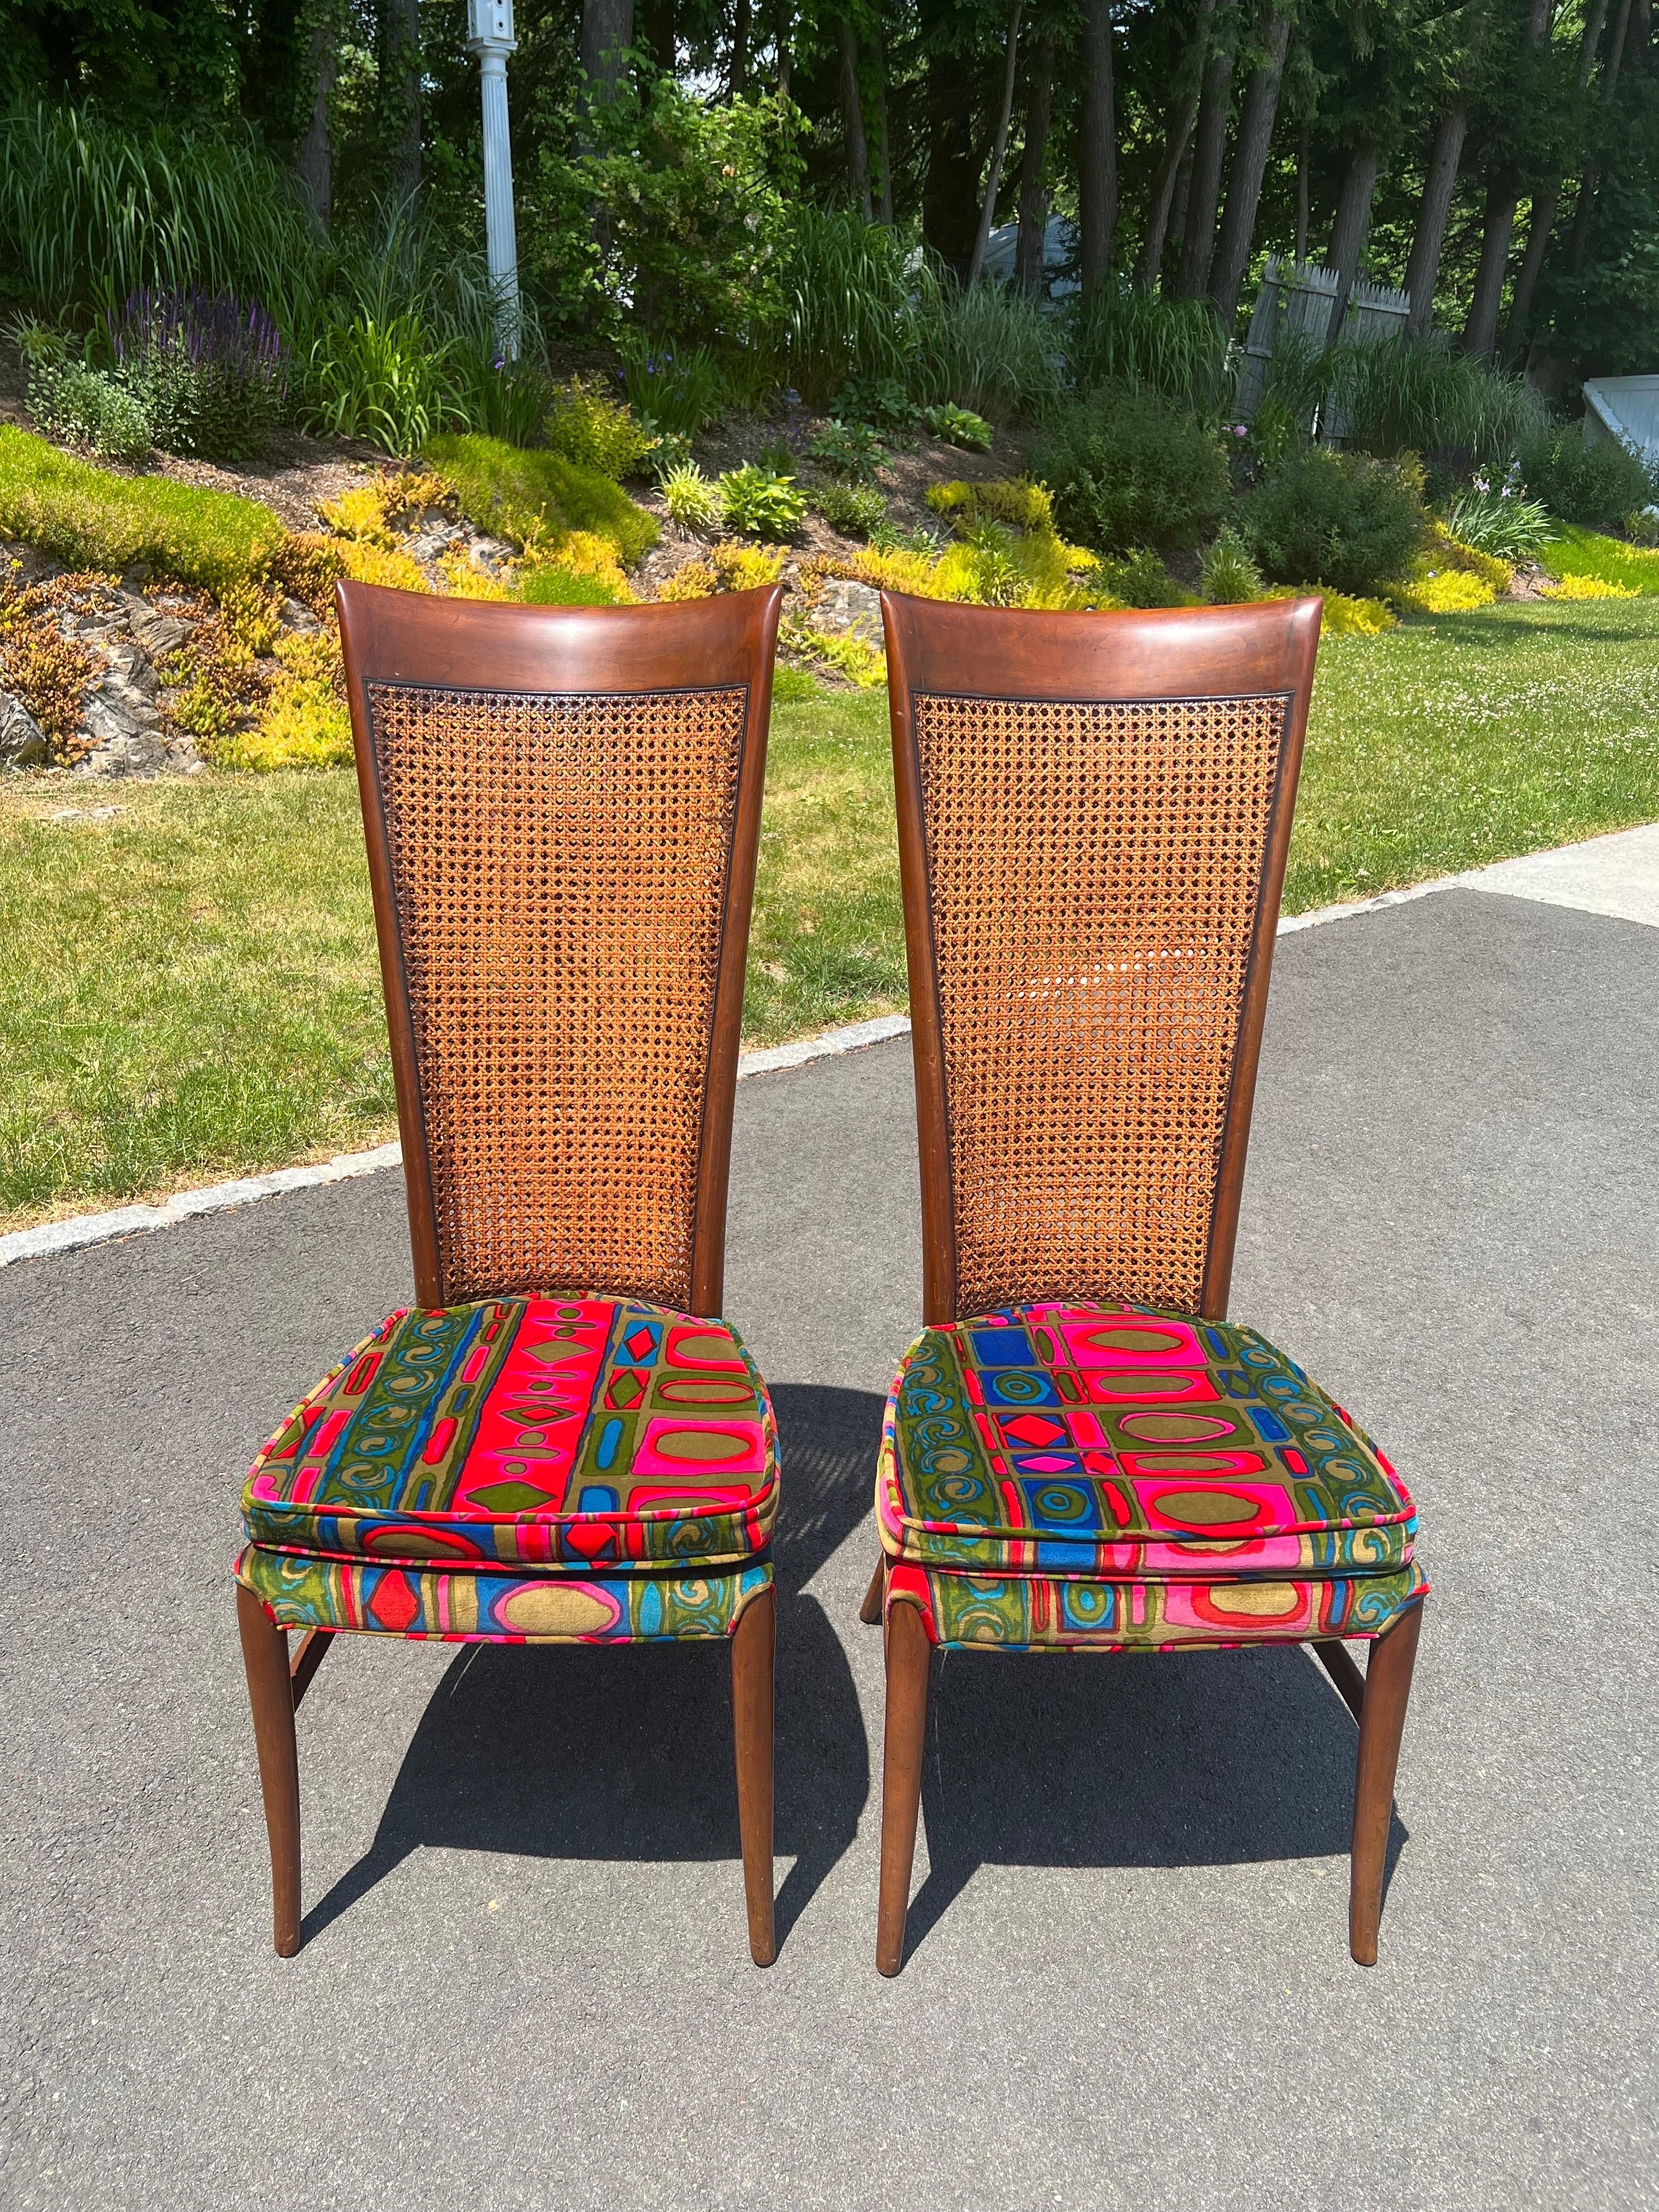 Pair of Caned Chairs with Jack Lenor Larson Velvet Upholstery. These beauties are in amazing condition and covered in the classic 